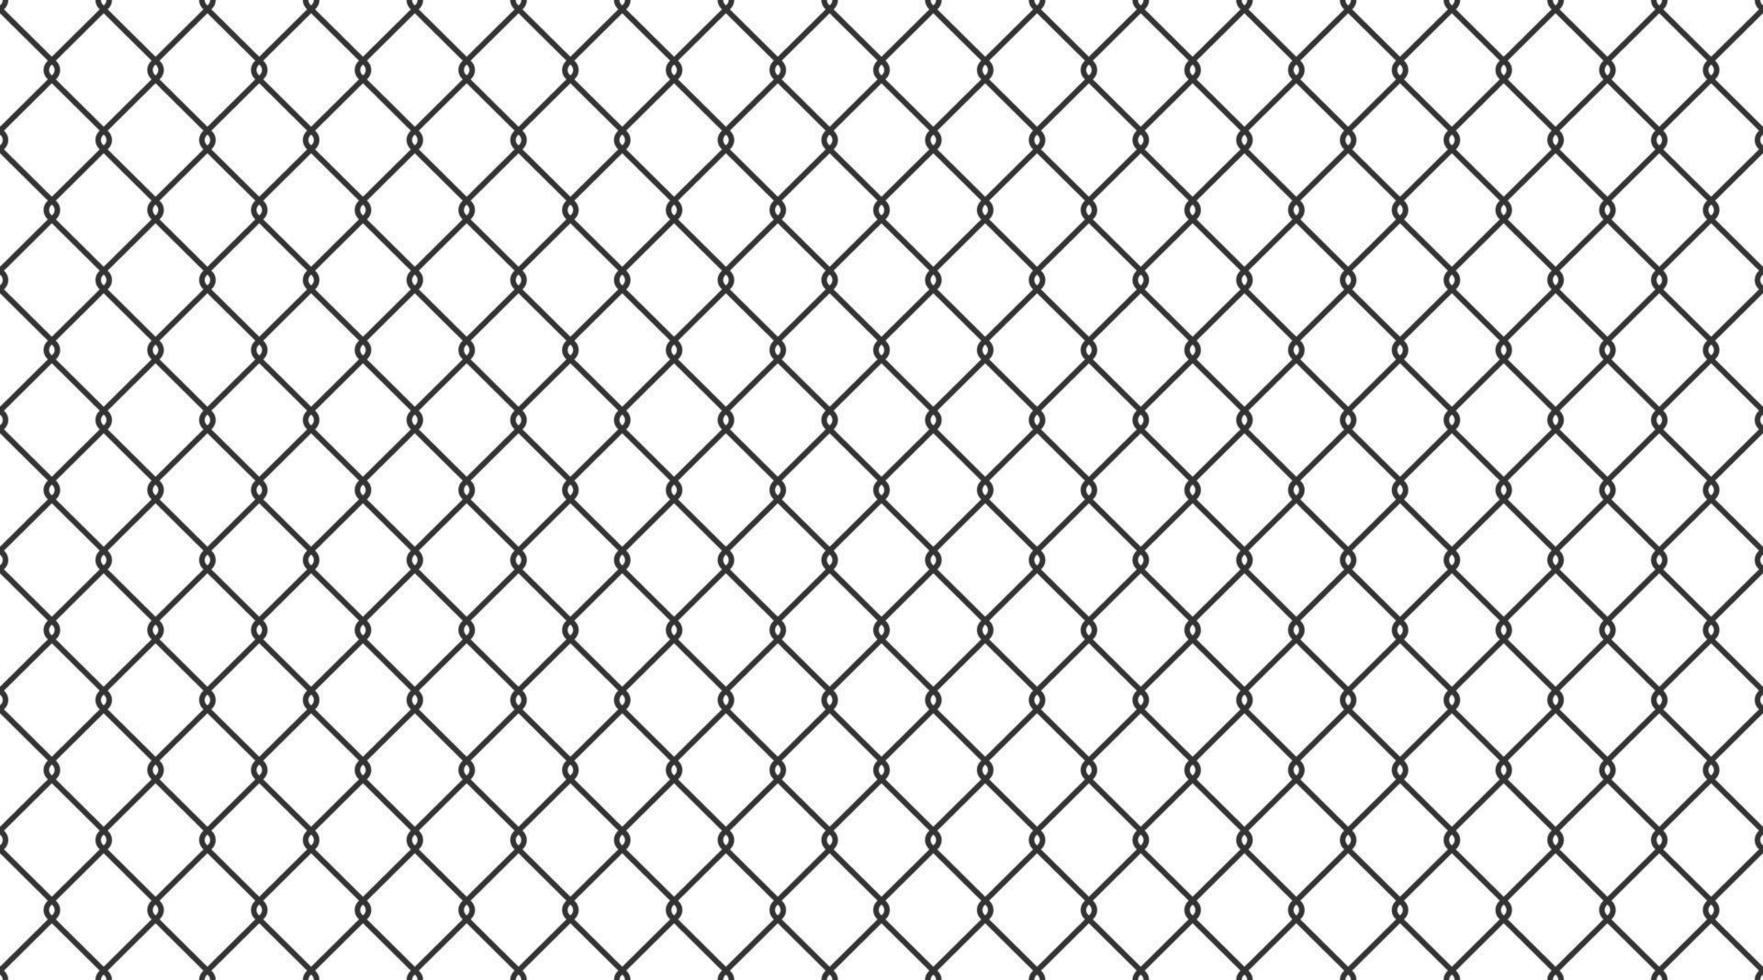 Steel wire chain link fence seamless pattern. Metal lattice with rhombus, diamond shape silhouette. Grid fence background. Prison wire mesh seamless texture. Vector illustration on white background